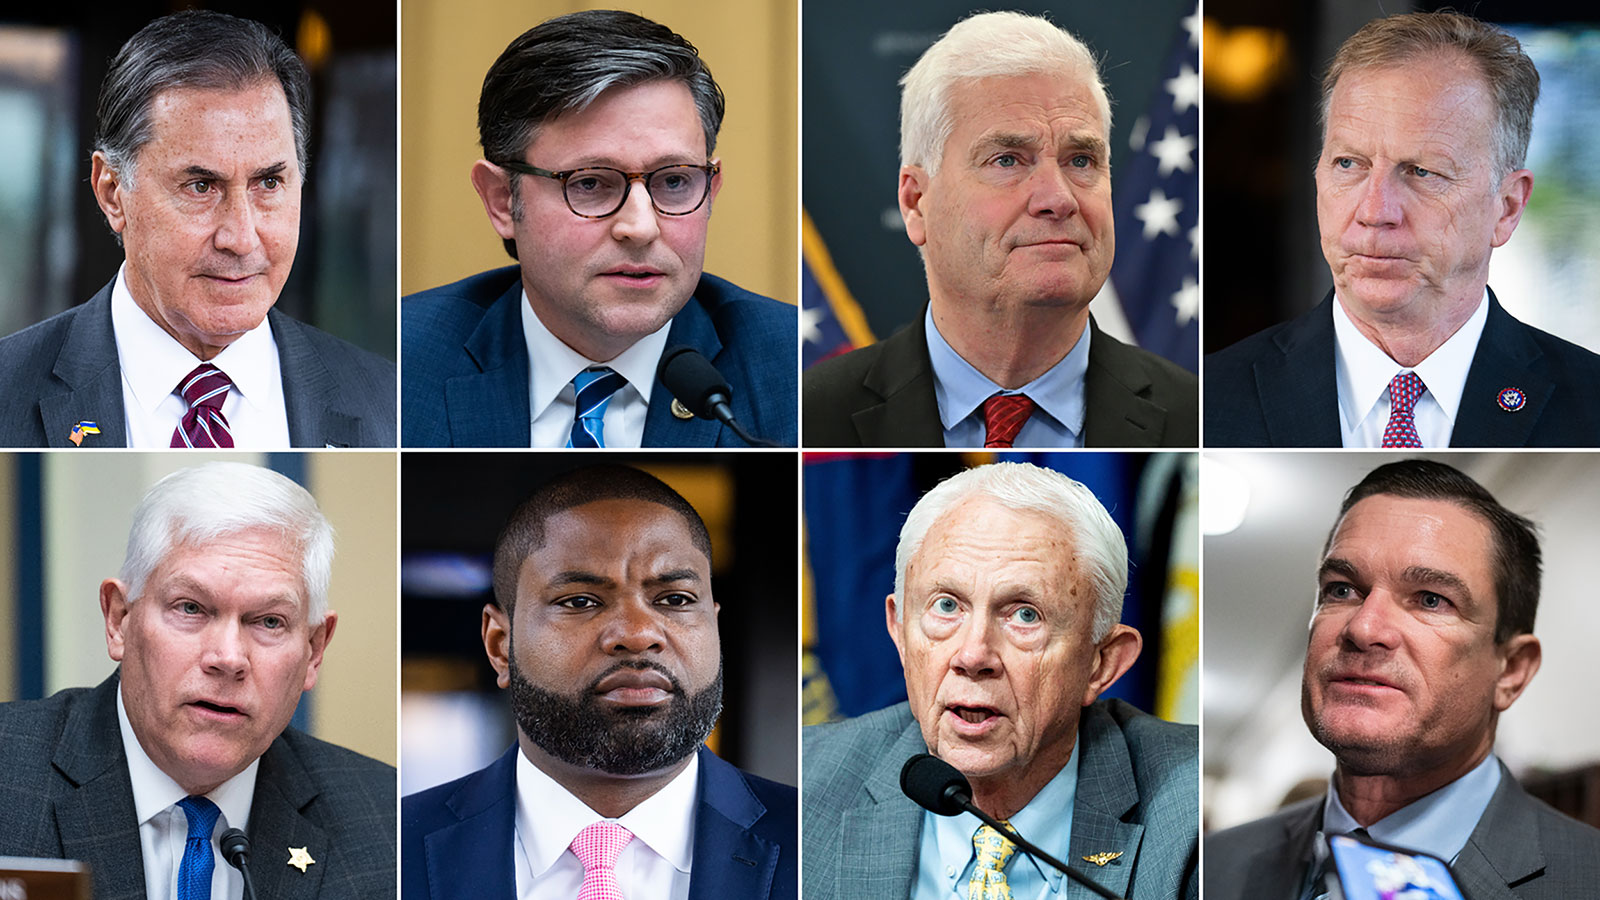 Top row, from left: Republican representatives Gary Palmer, Mike Johnson, Tom Emmer, and Kevin Hern. Bottom row, from left: Pete Sessions, Byron Donalds, Jack Bergman and Austin Scott.